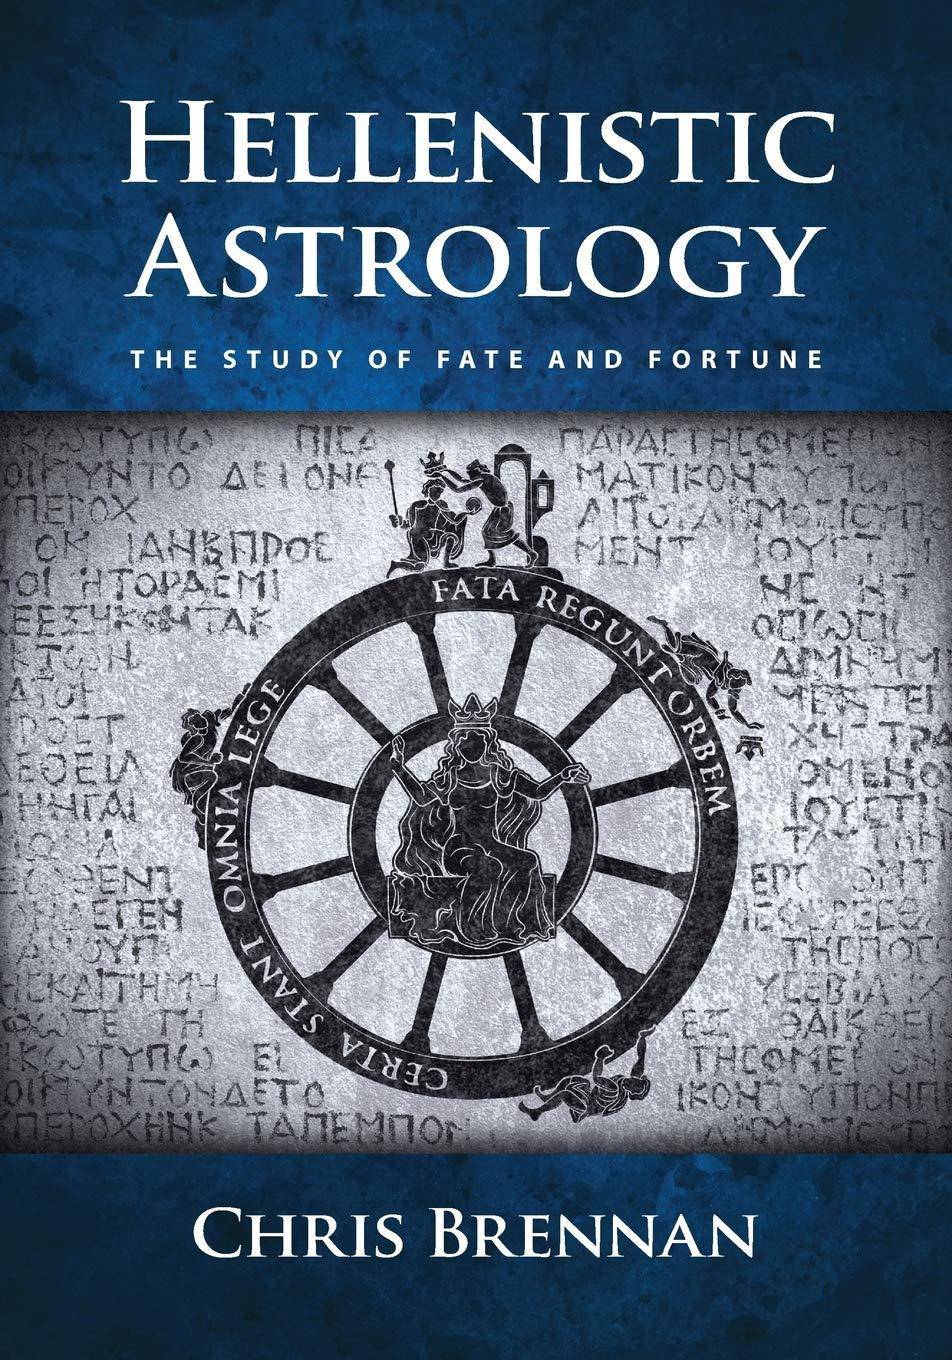 Hellenistic Astrology: The Study of Fate and Fortune - SureShot Books Publishing LLC